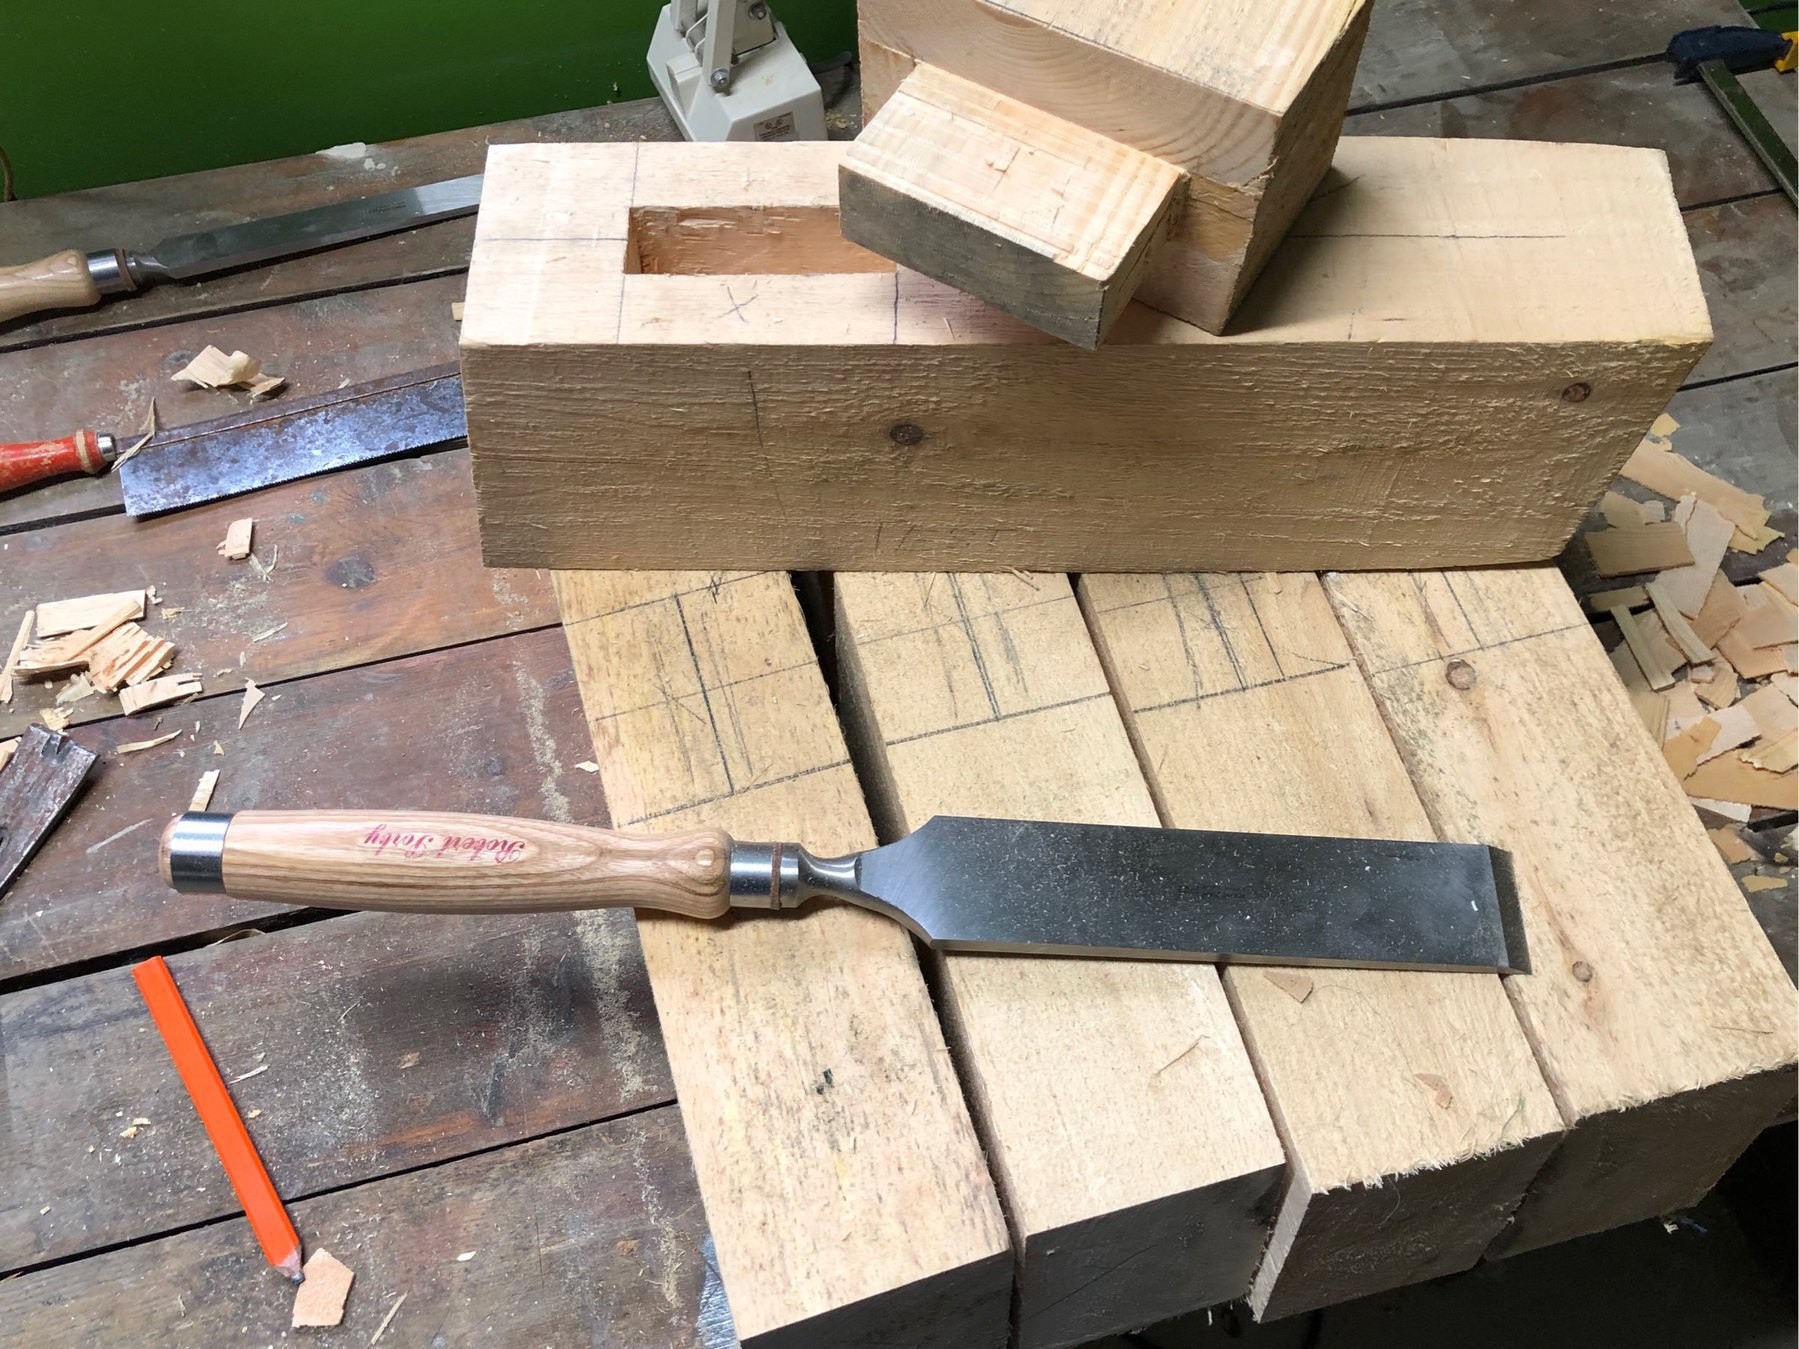 pine chunks eoth a mortise and tenon joint. four other pieces marked for cutting